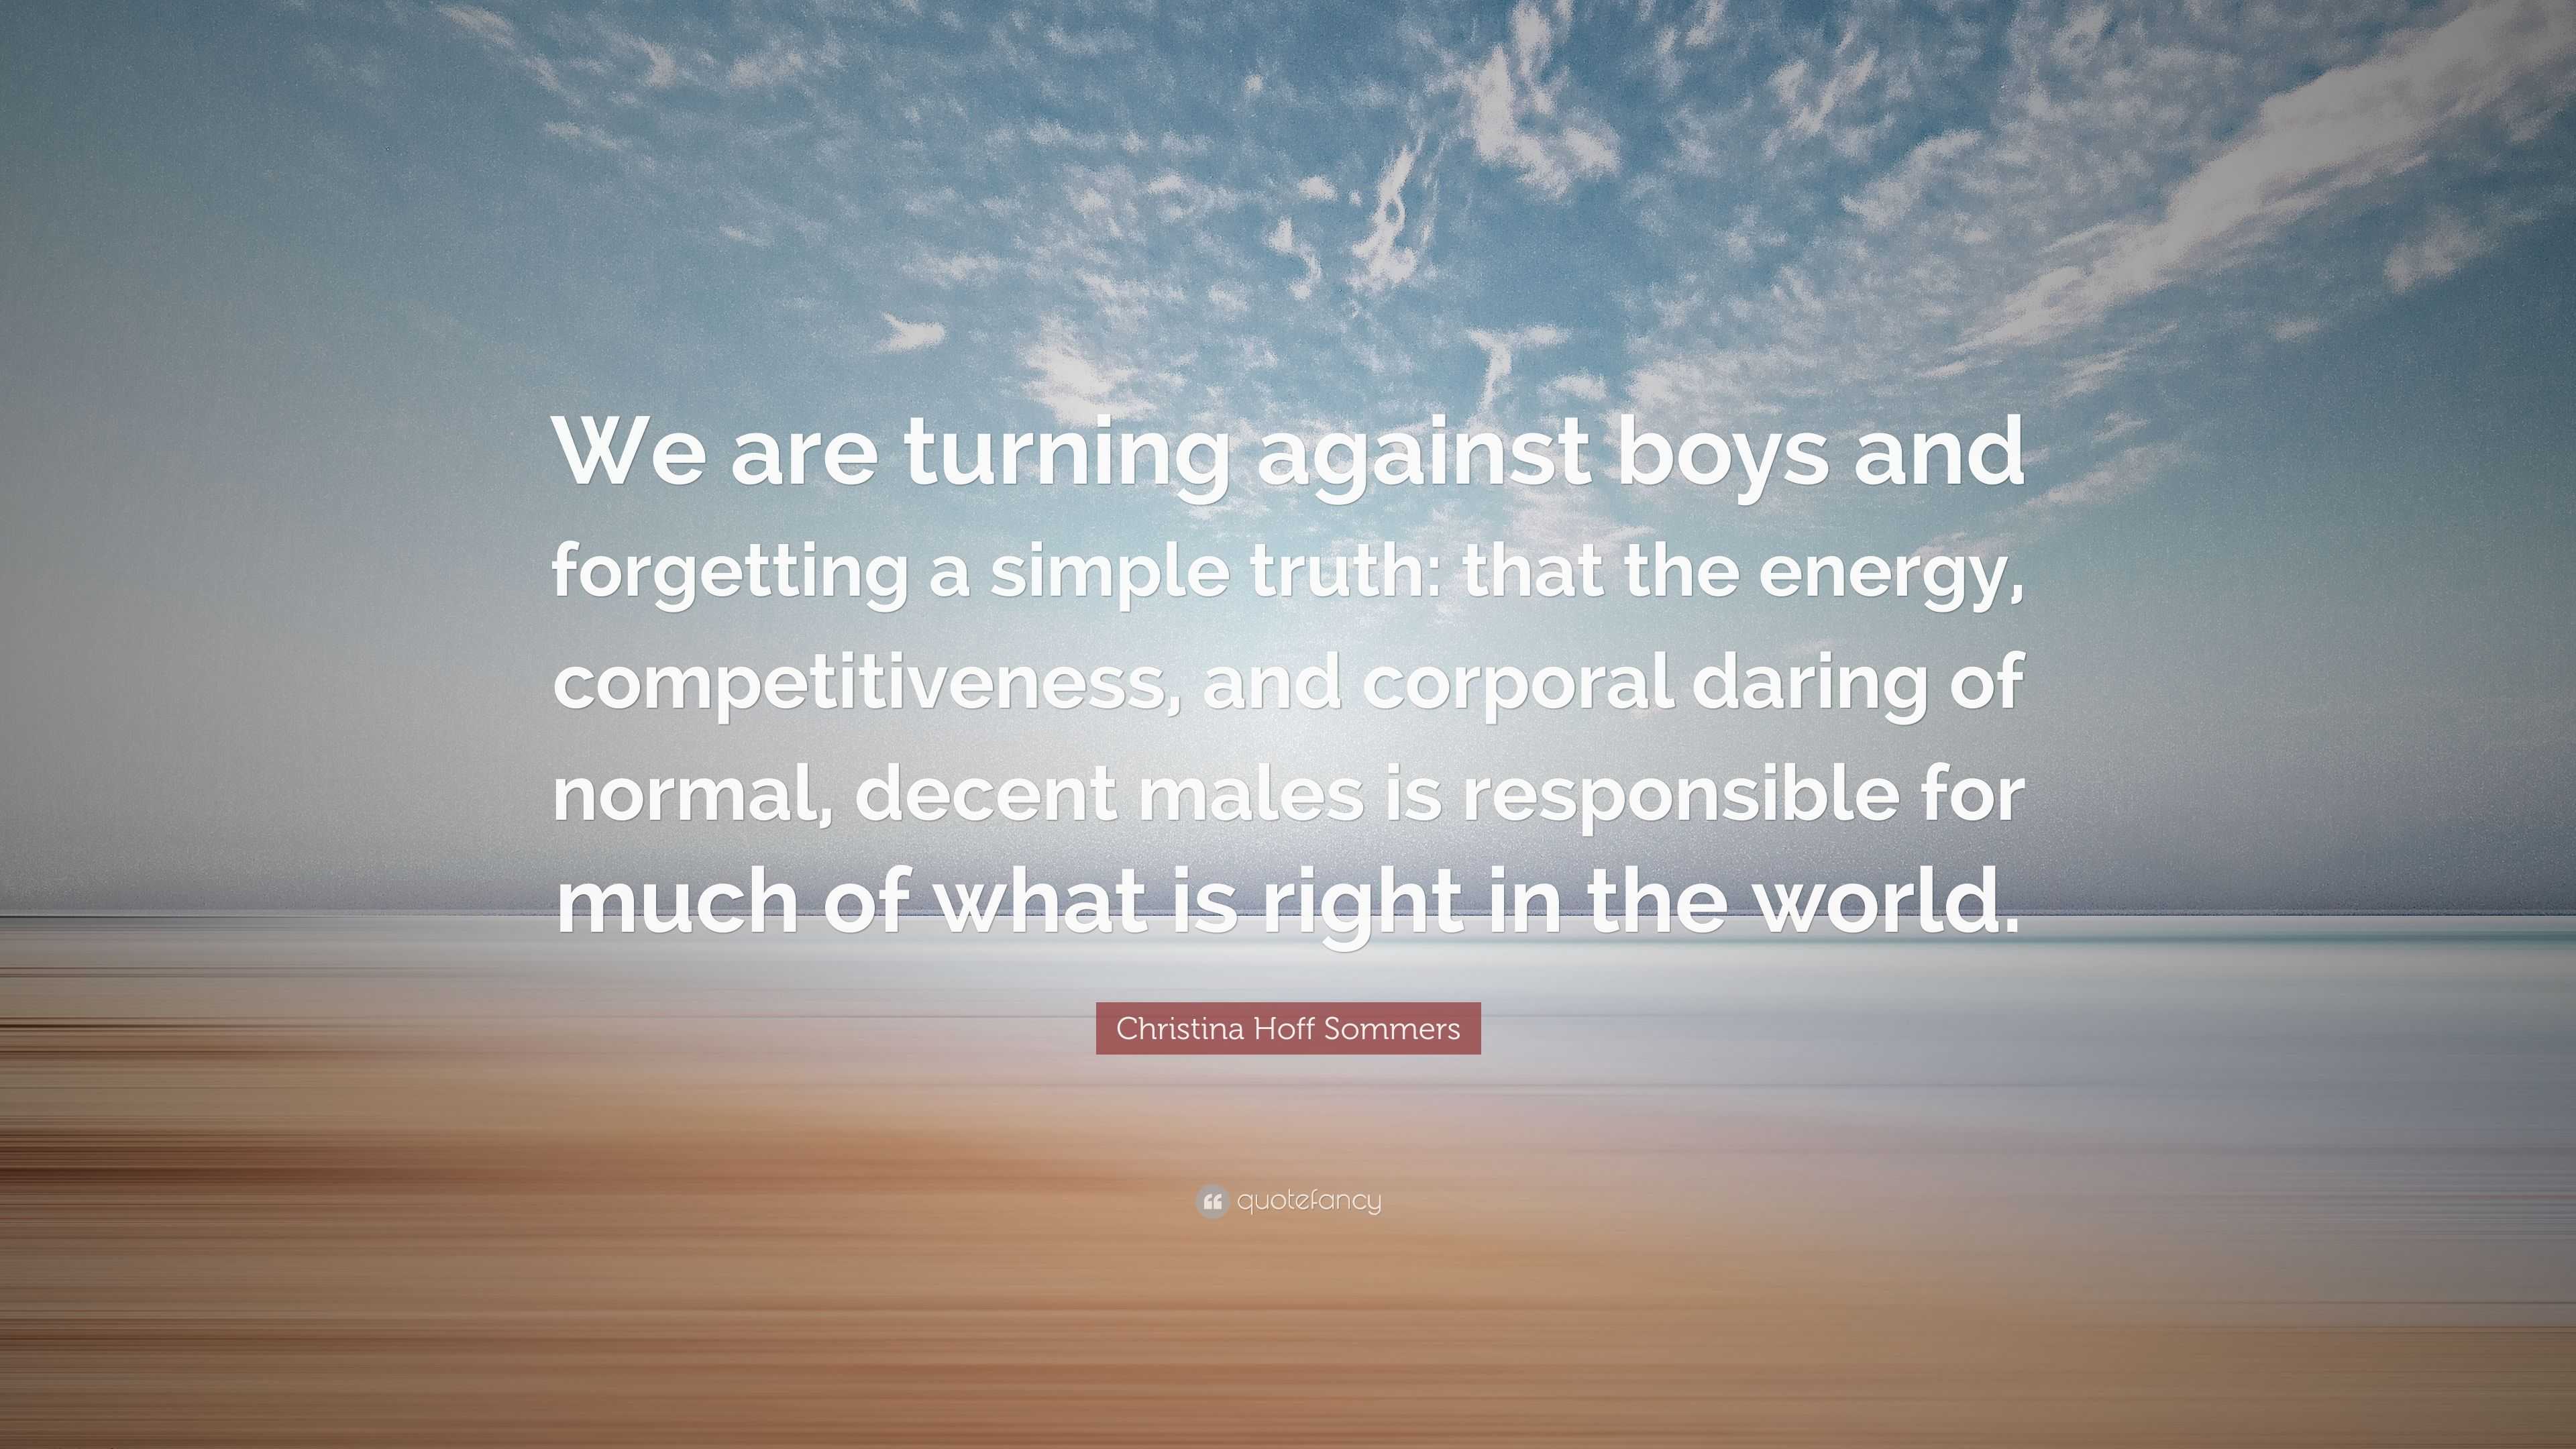 Christina Hoff Sommers Quote: “We are turning against boys and